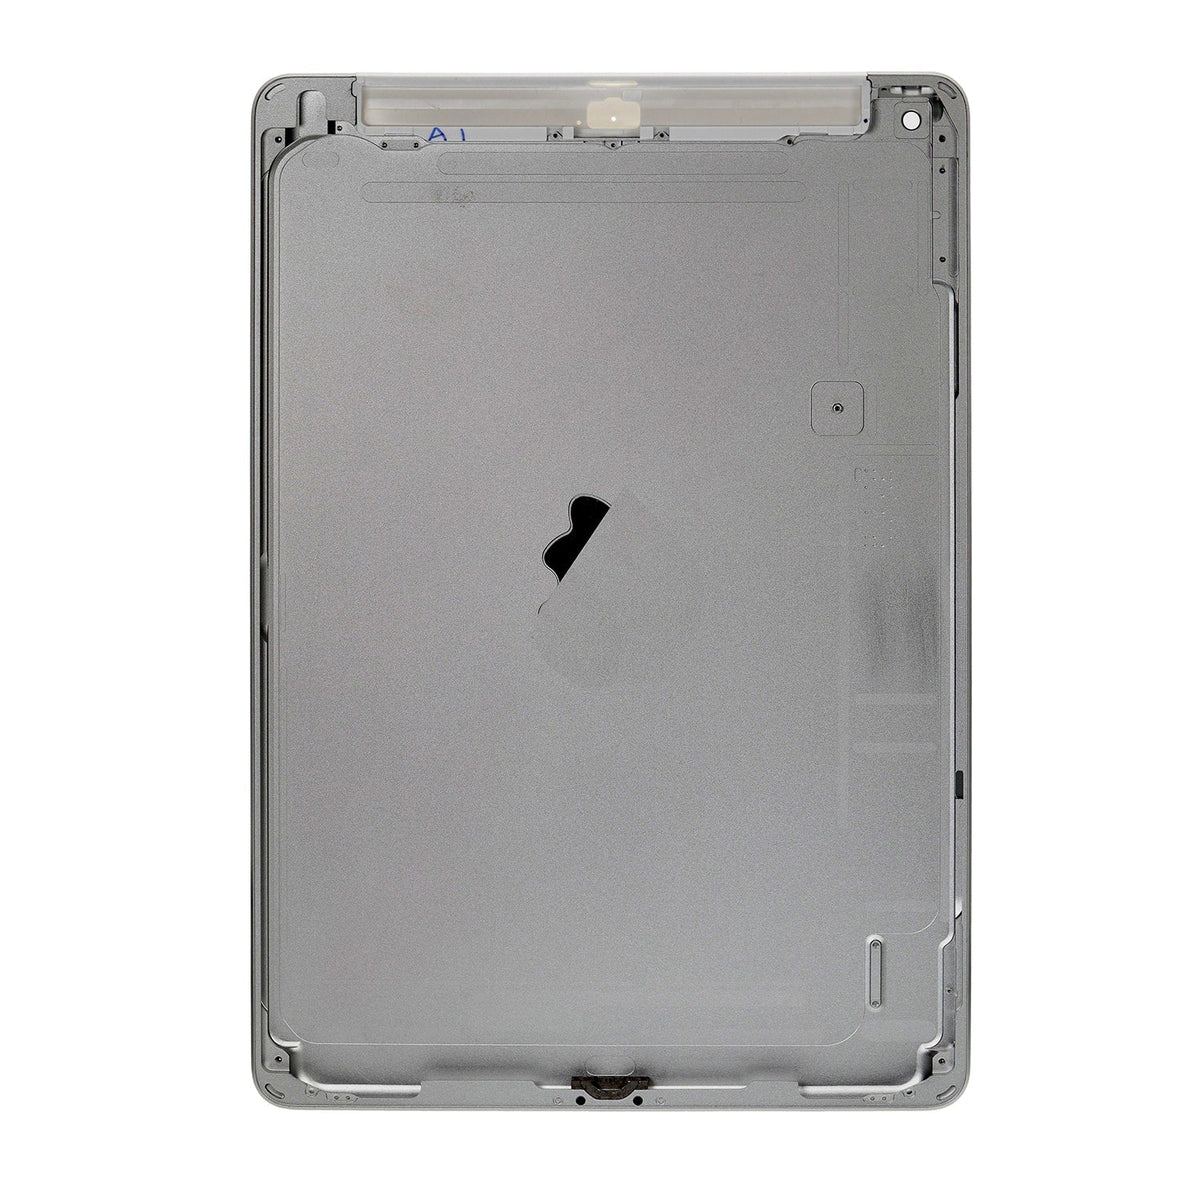 GREY BACK COVER (4G VERSION) FOR IPAD 7TH/8TH